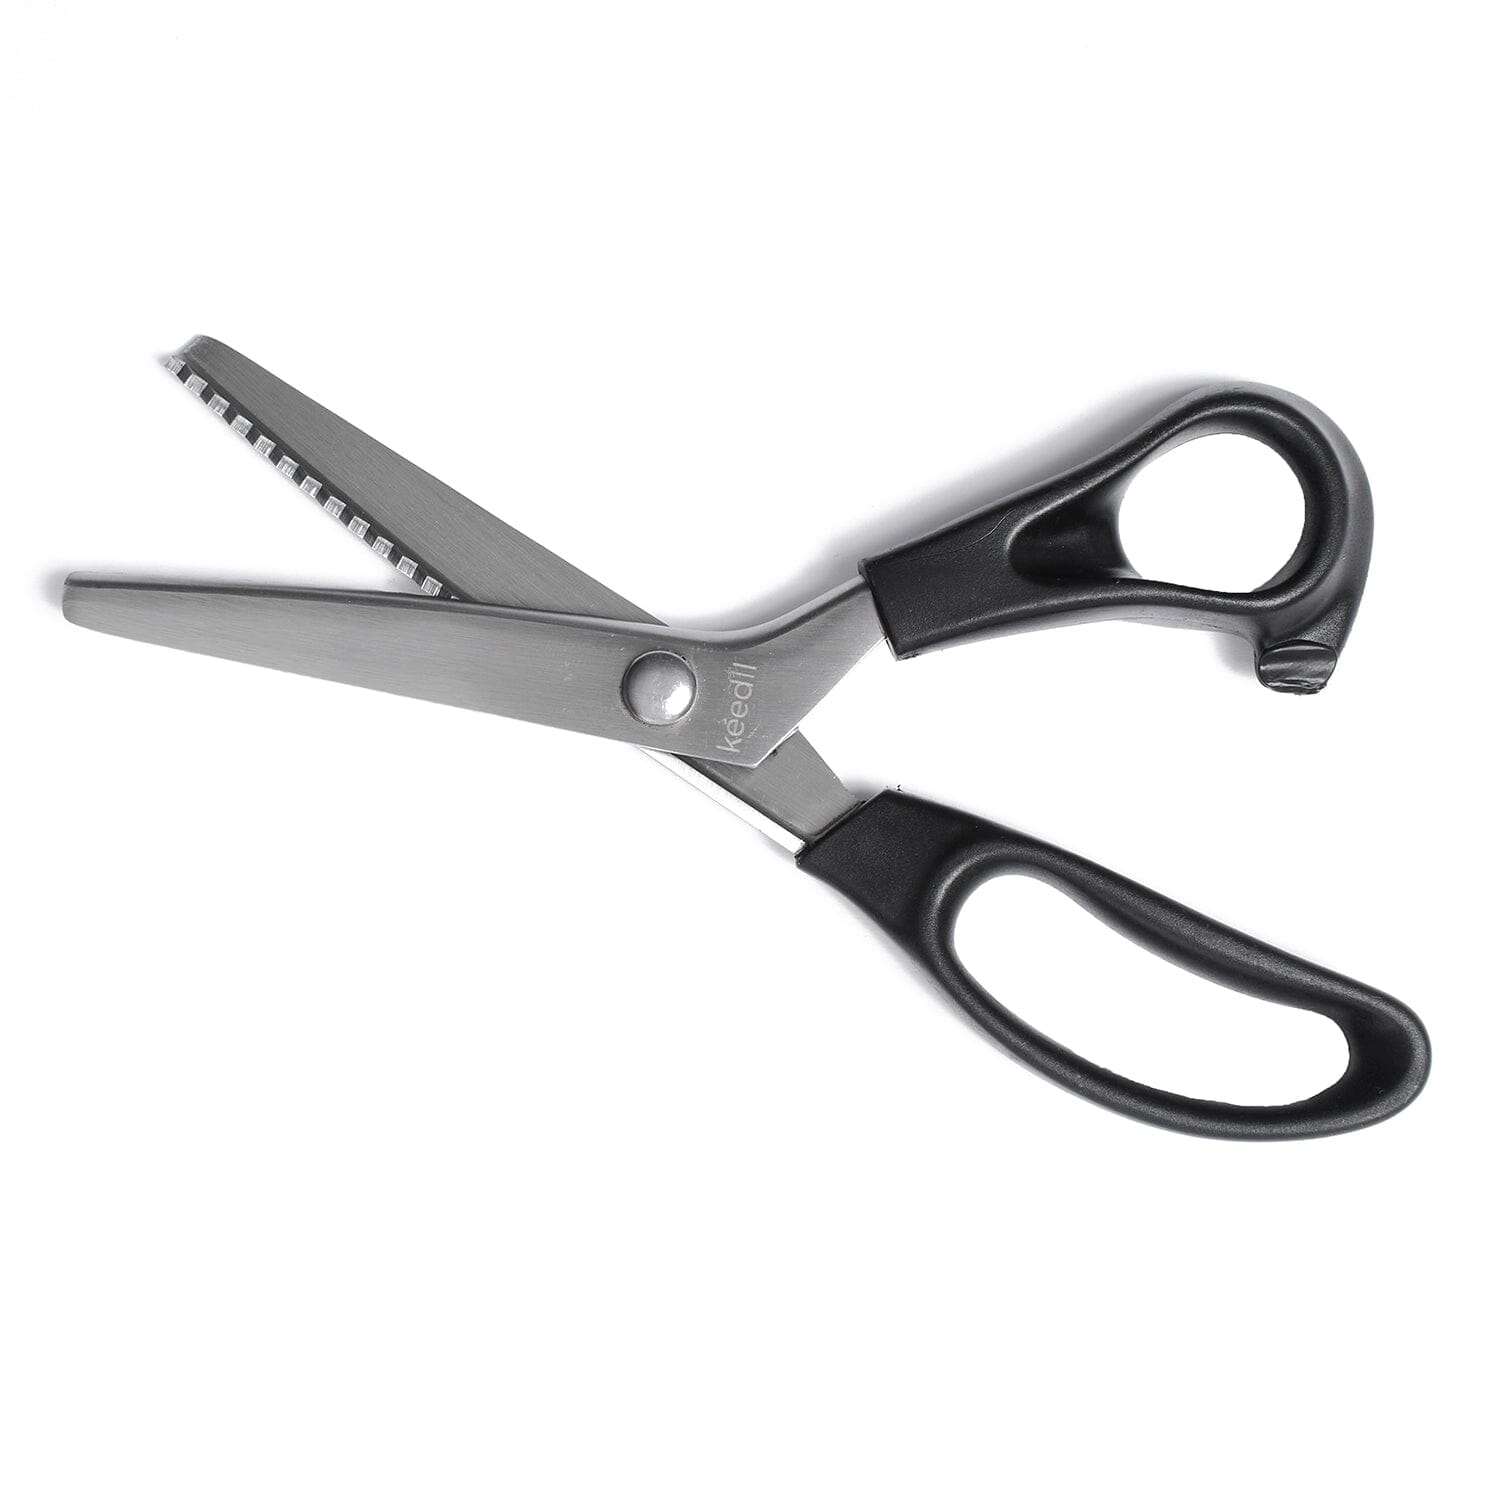 What Are Pinking Shears And How To Use Them? 